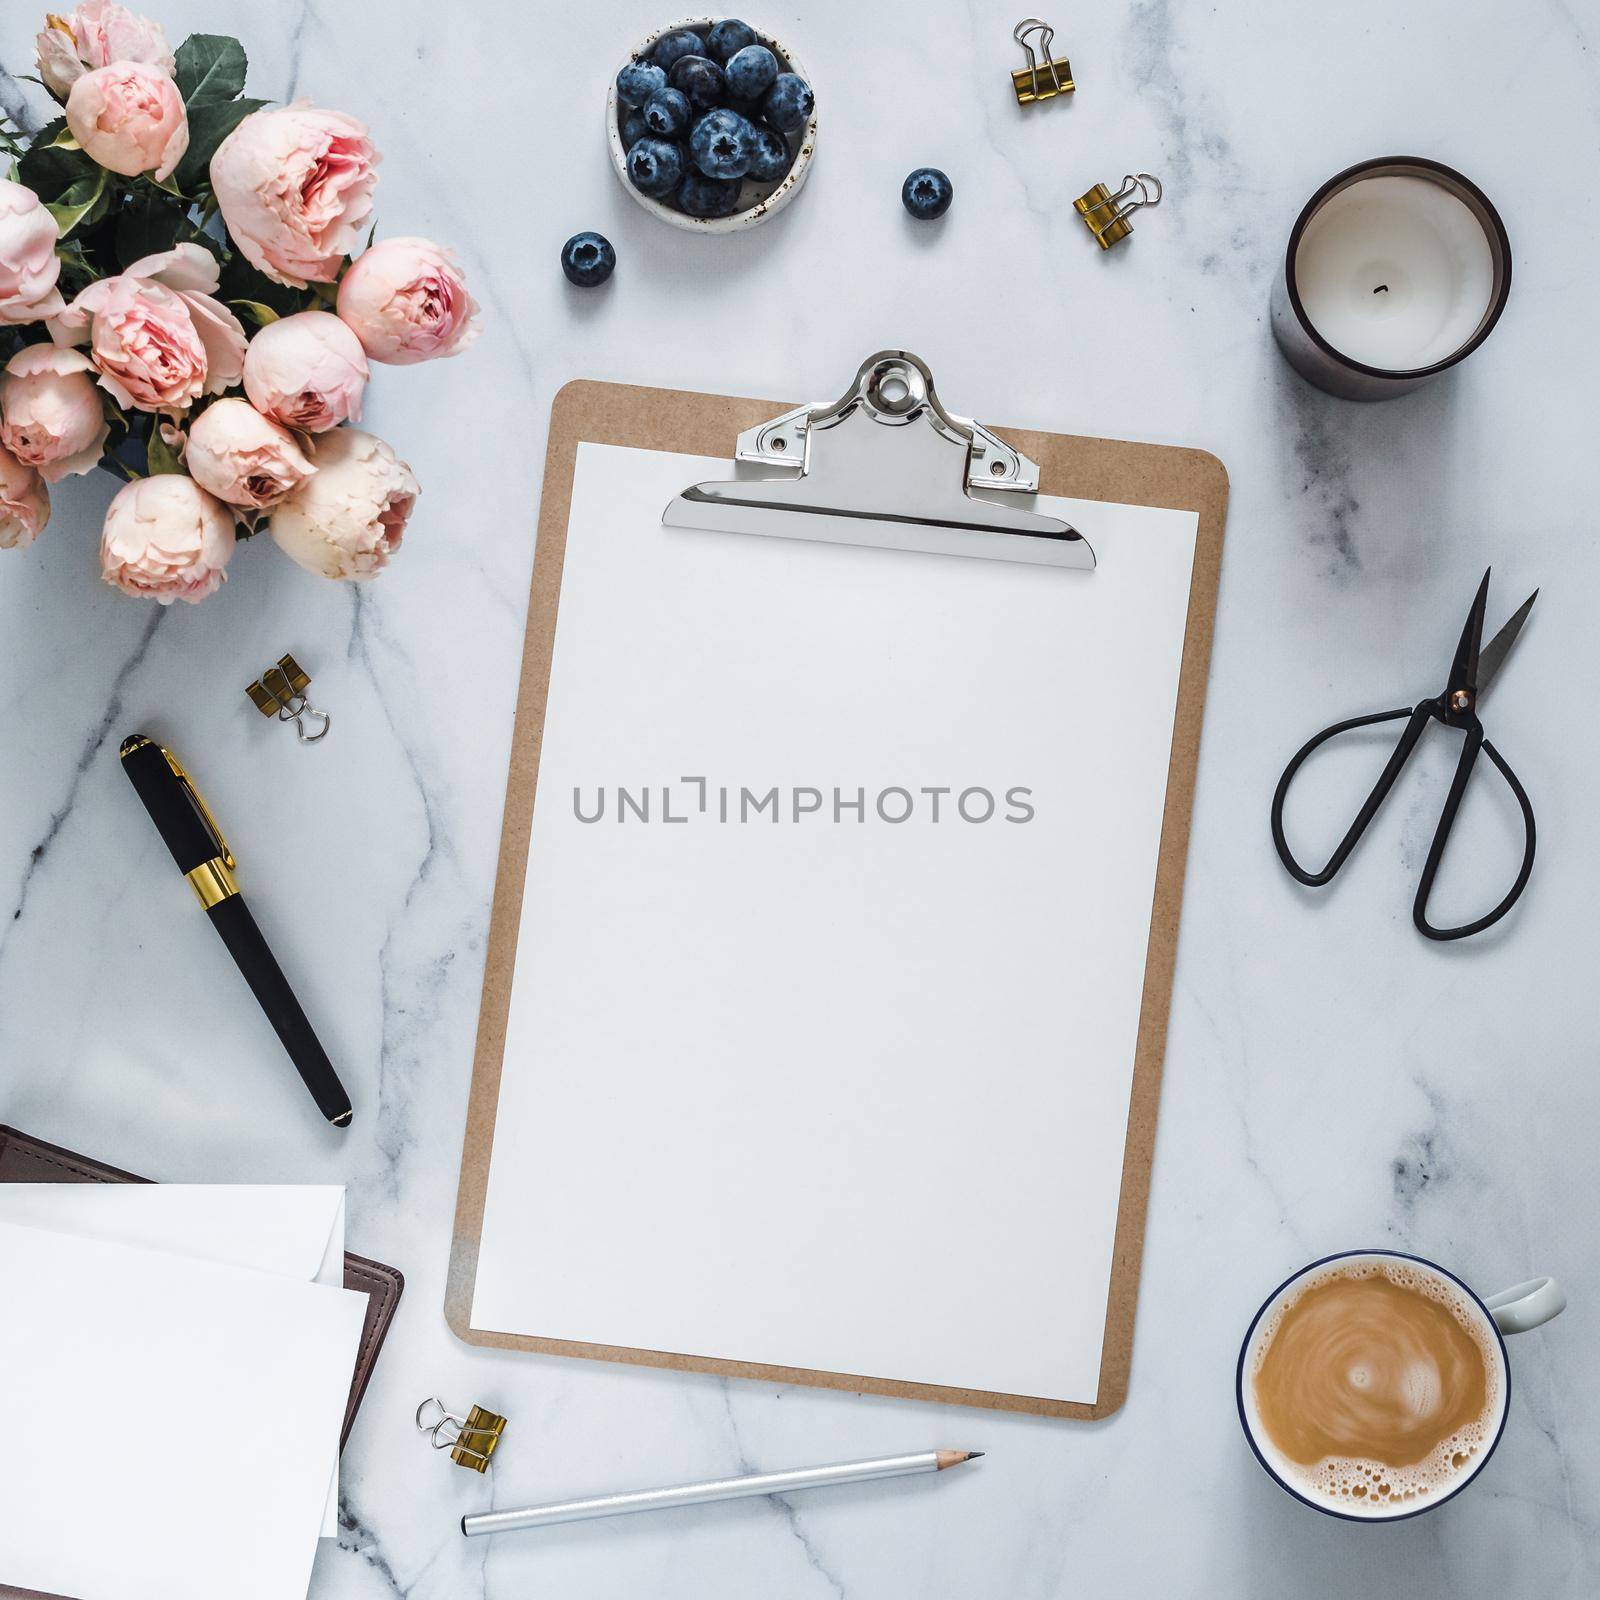 Top view of clipboard with white empty page. Clipboard, flowers, scented candle on white marble. Feminine home office mockup with blank sheet of paper A4 portrait format, copy space. Flat lay